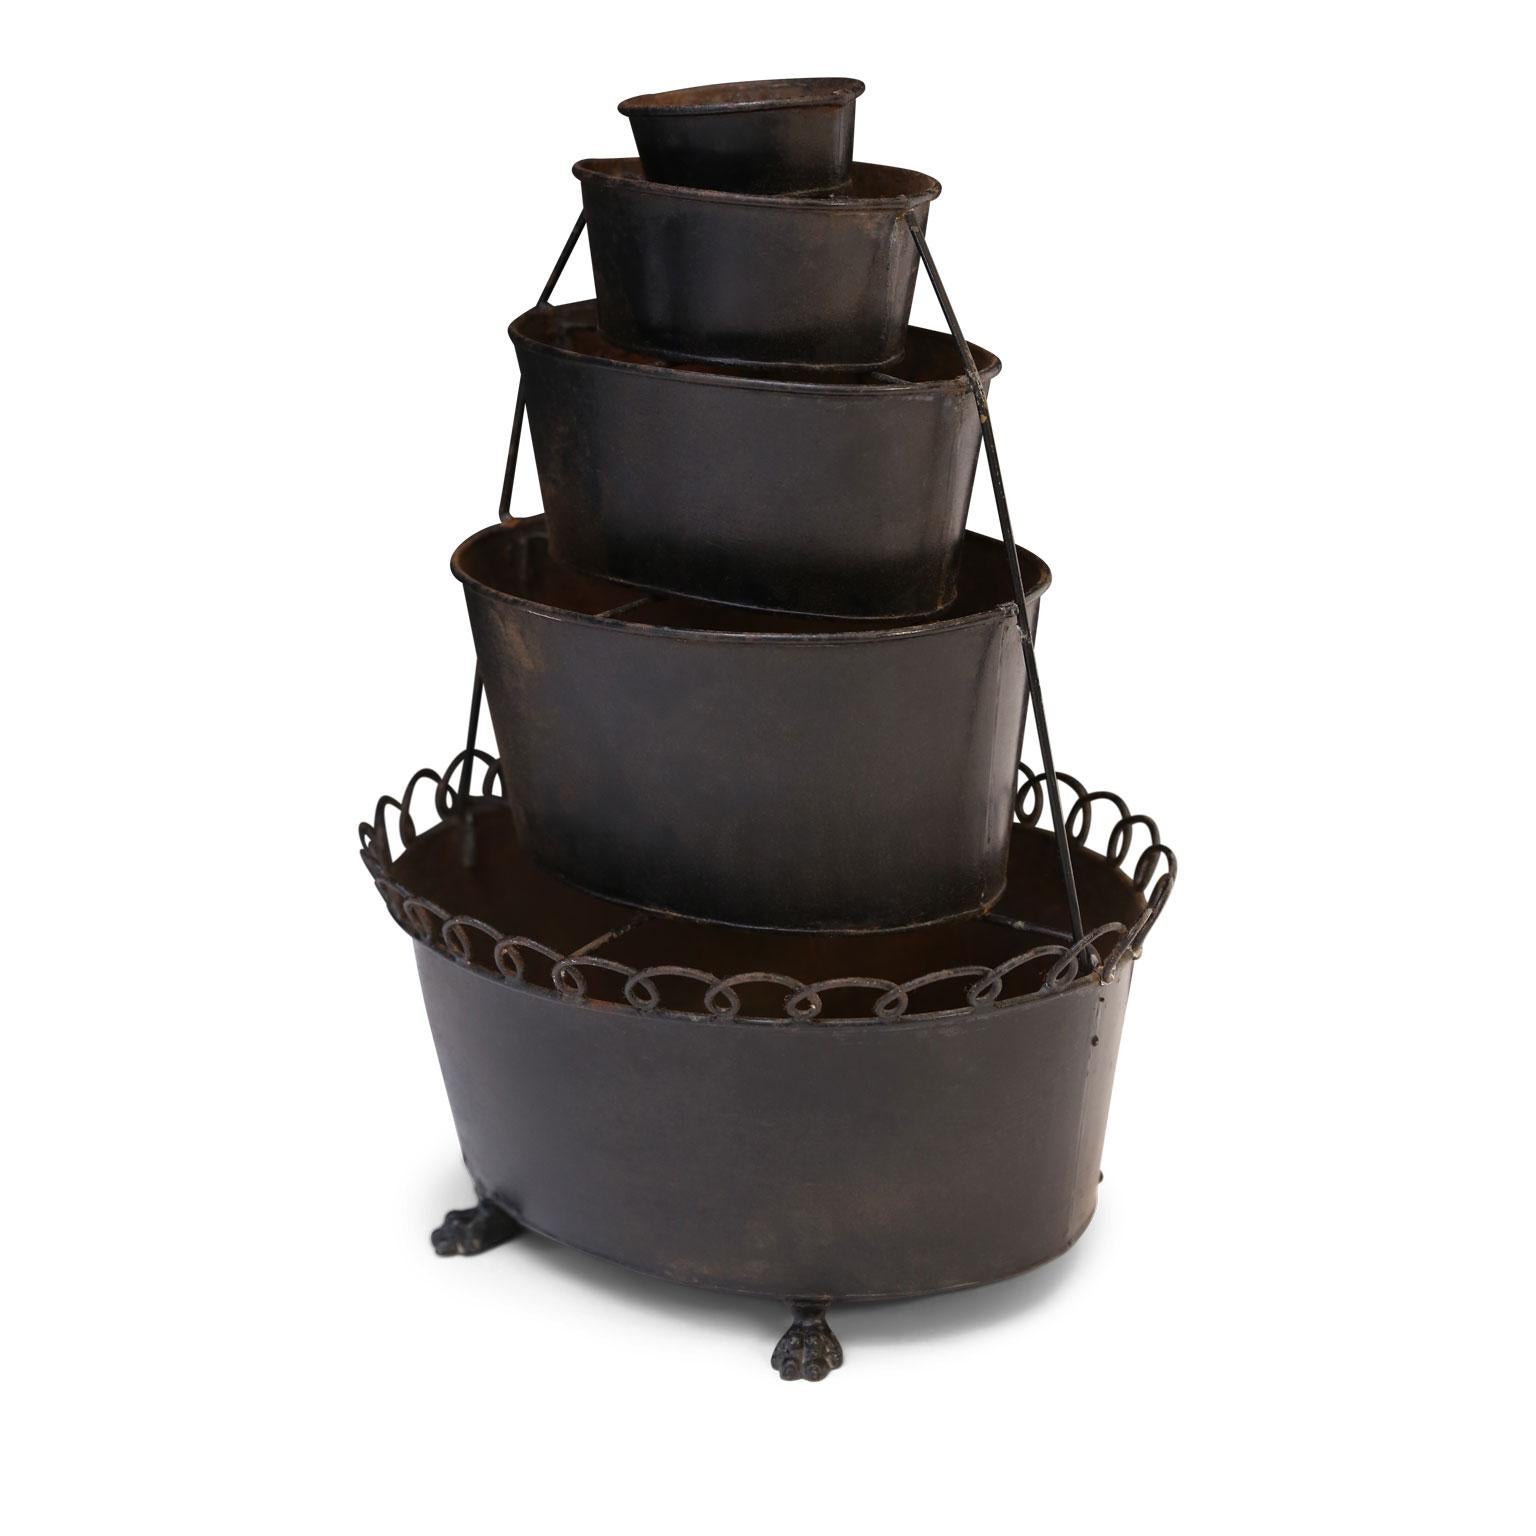 Vintage black painted tole tulipiere-shape five-tier jardinière raised upon cast lion paws. Lowest tier of this plant stand is bordered by a decorative wire gallery-edge.